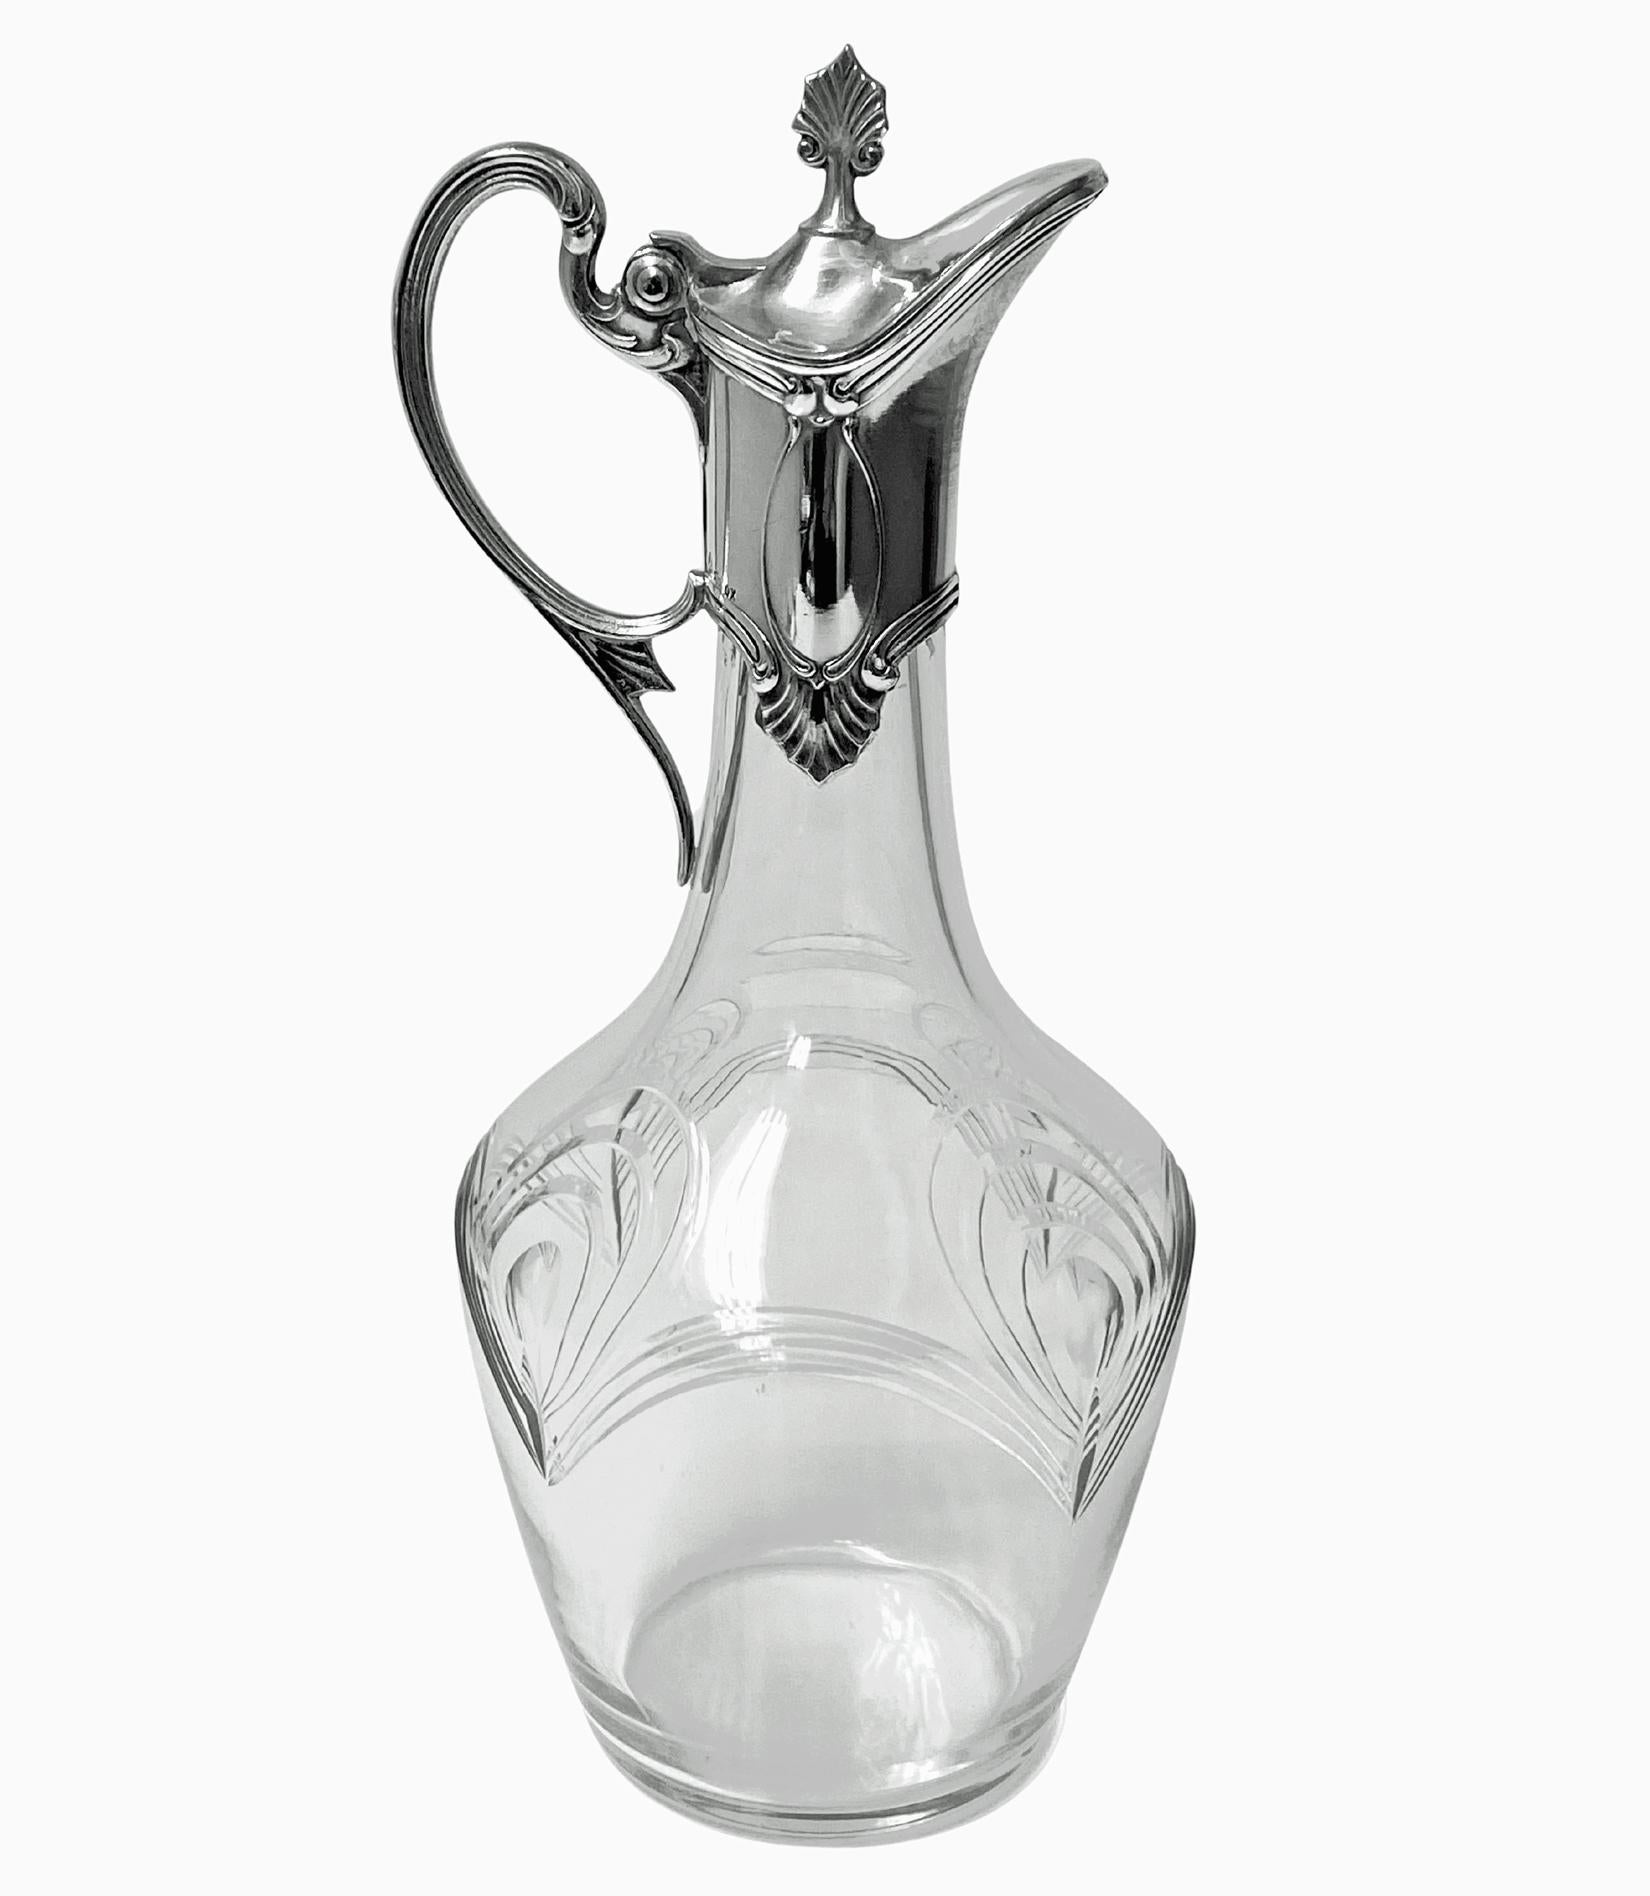 WMF Art Nouveau cut glass and silver plate Liqueur Set C.1900. The silver plate set with liqueur jug and four glasses in holders, each with stylized art nouveau design engraved crystal. Height of Jug: 8 inches. Height of glasses: 1 7/8 - 2 1/8